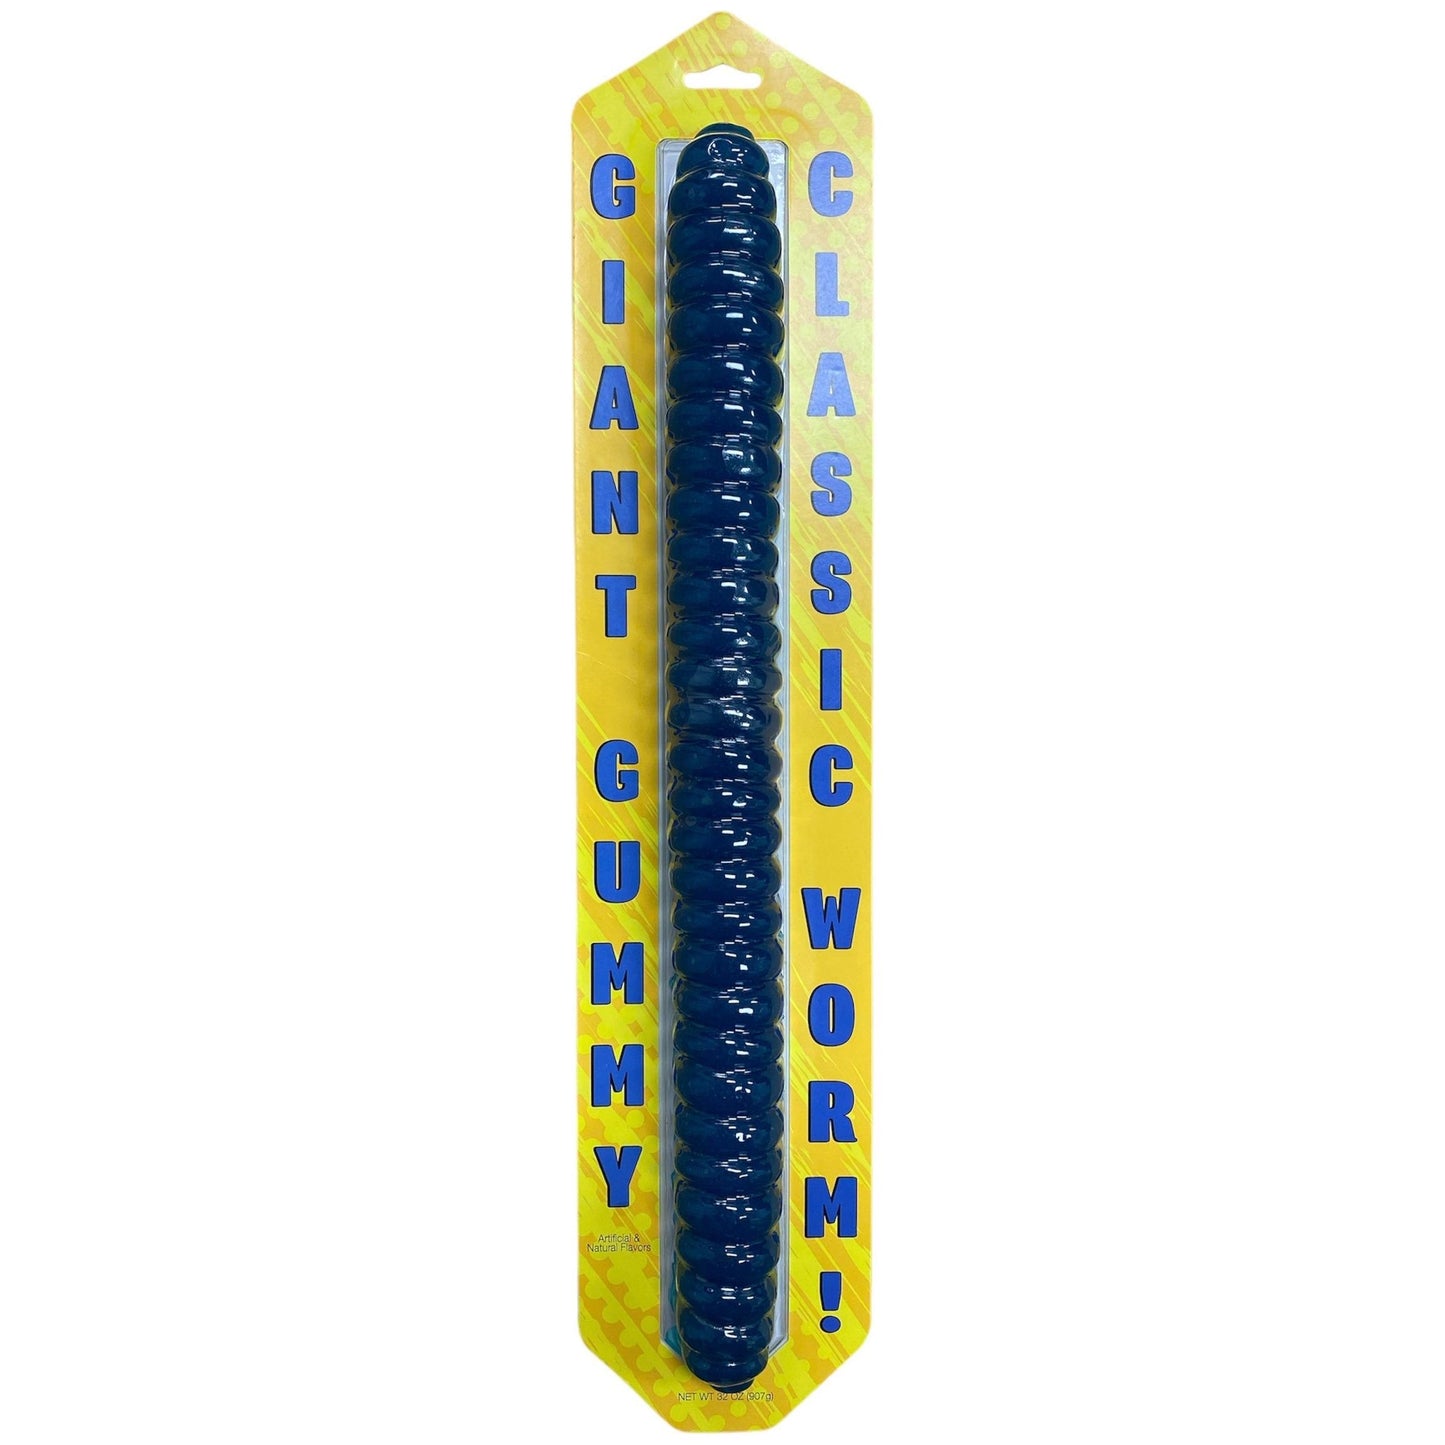 World's Largest Gummy Worm Blue Raspberry 26 Inches 2lb 1ct (NEW BLISTER PACKAGING)